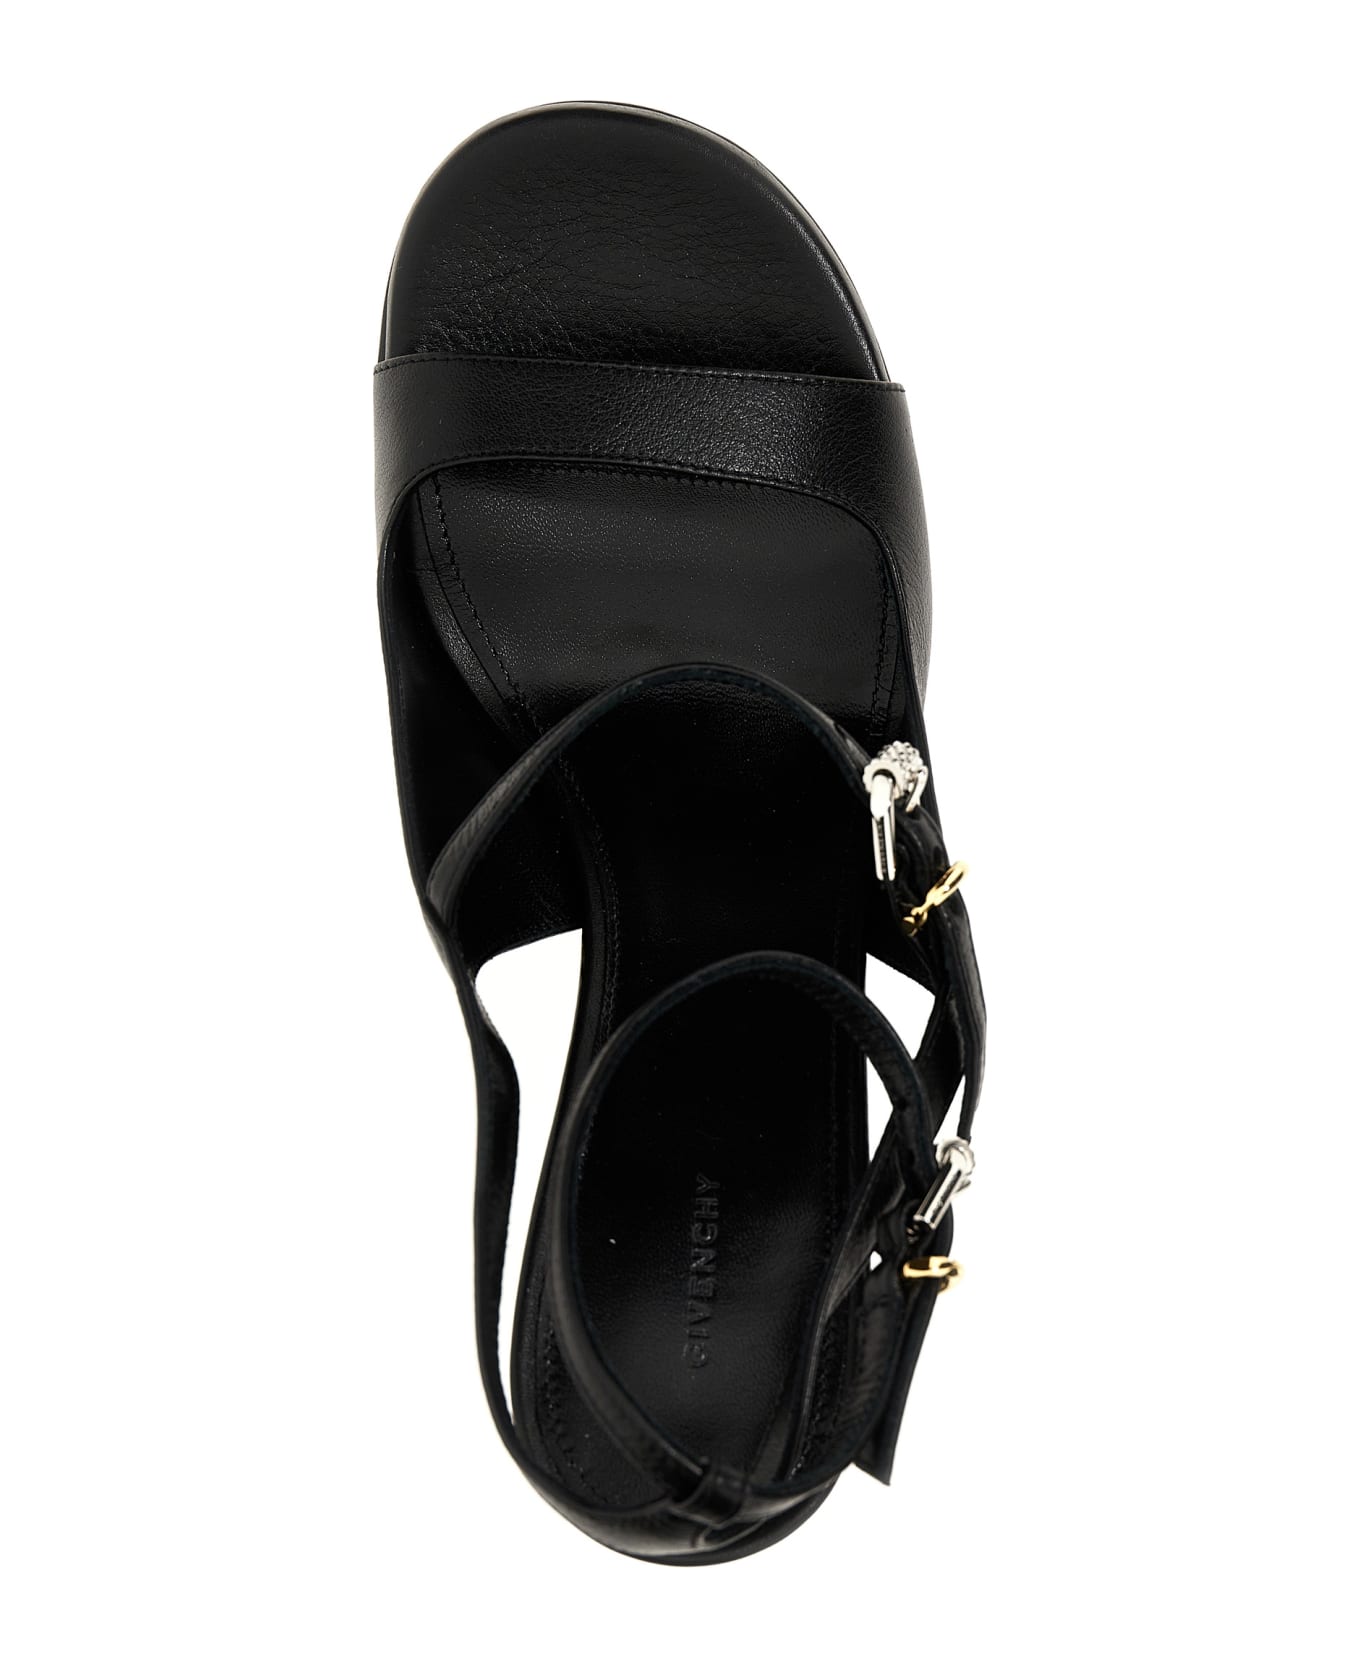 Givenchy Voyou Sandals - Black